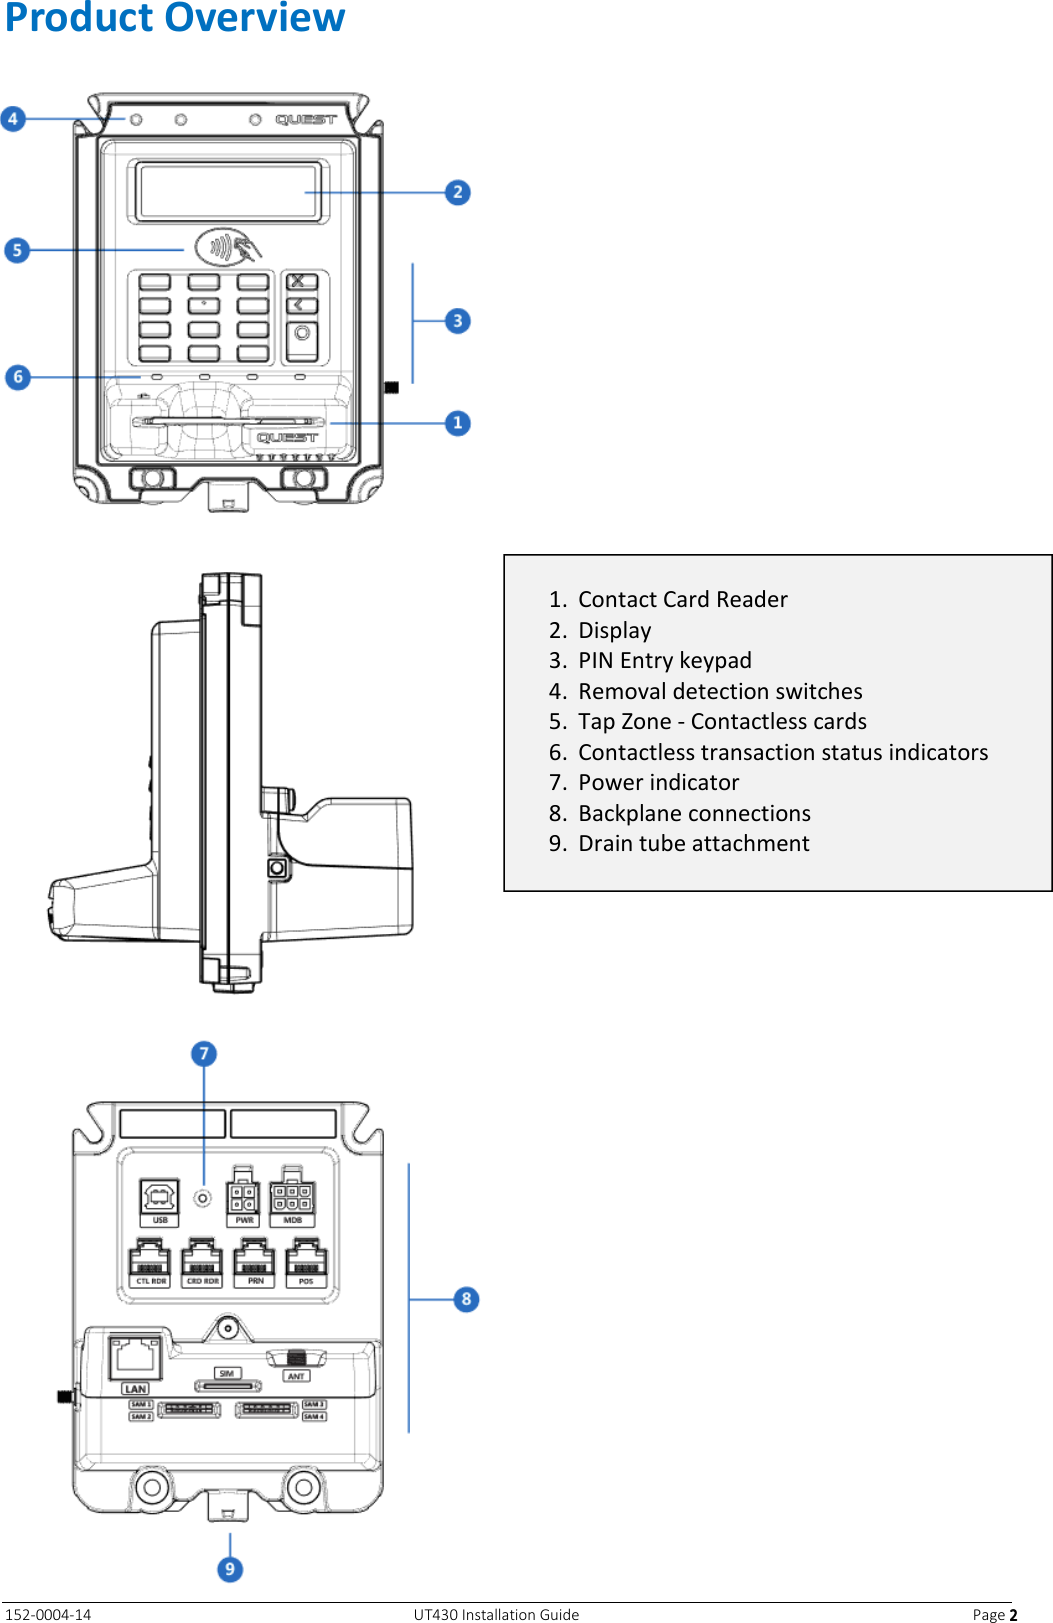   152-0004-14  UT430 Installation Guide  Page 2222 Product Overview   1. Contact Card Reader 2. Display 3. PIN Entry keypad 4. Removal detection switches 5. Tap Zone - Contactless cards 6. Contactless transaction status indicators 7. Power indicator 8. Backplane connections 9. Drain tube attachment 